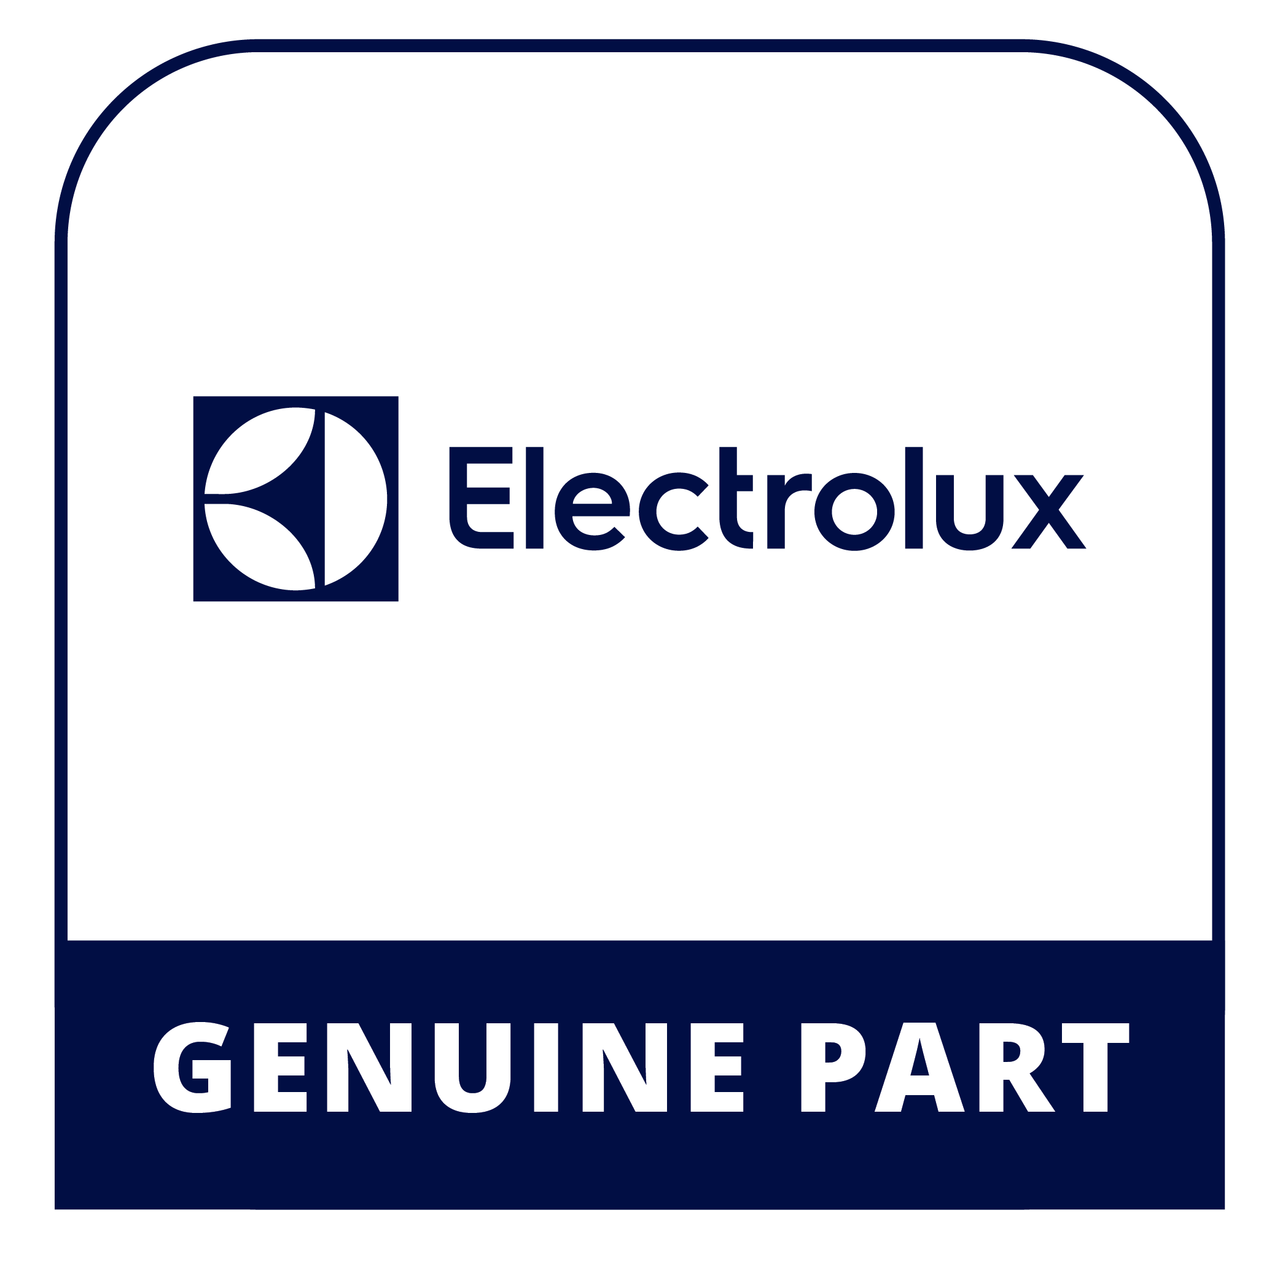 Frigidaire - Electrolux 318203613 Owners Manual - Genuine Electrolux Part